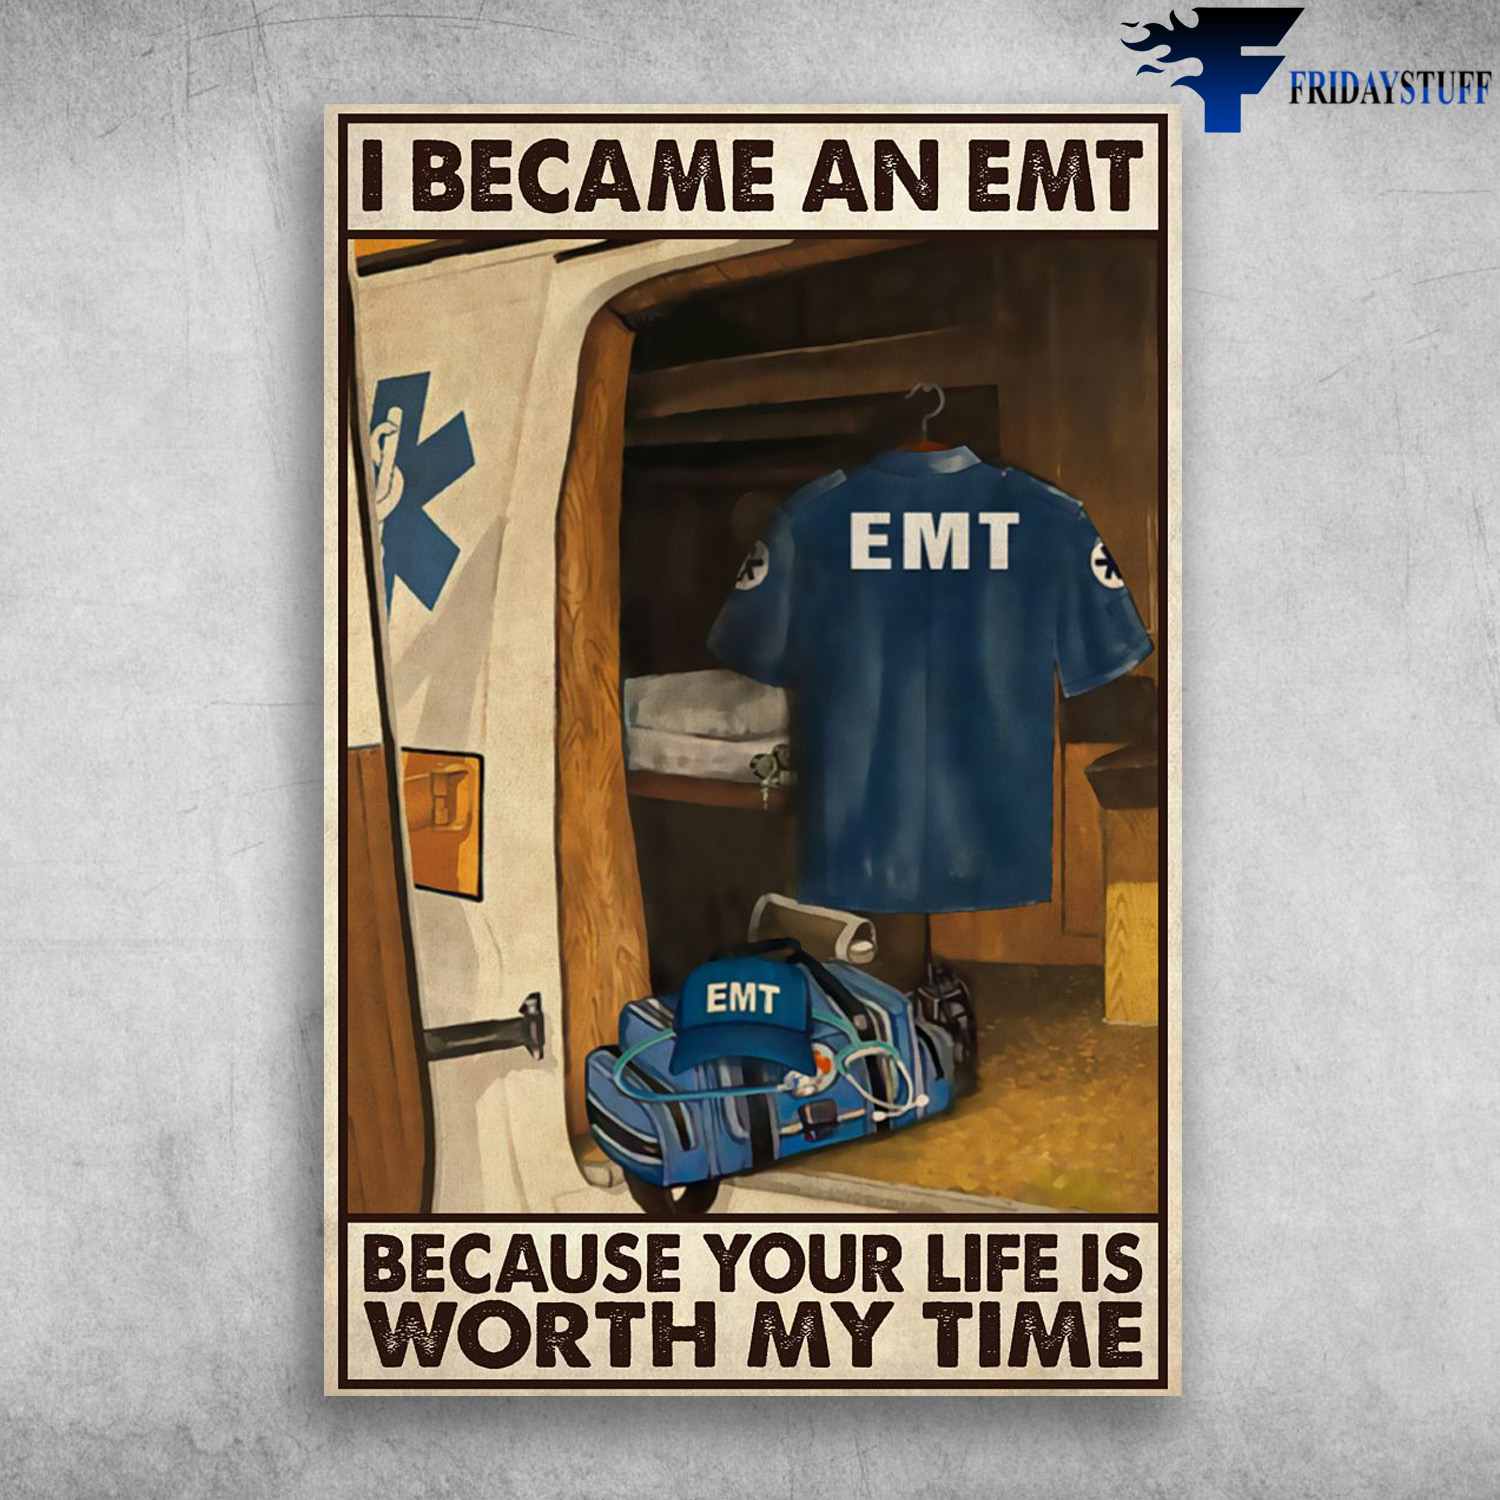 Emergency Medical Technician - Became An EMT, Because Your Life Is Worth My Time - FridayStuff